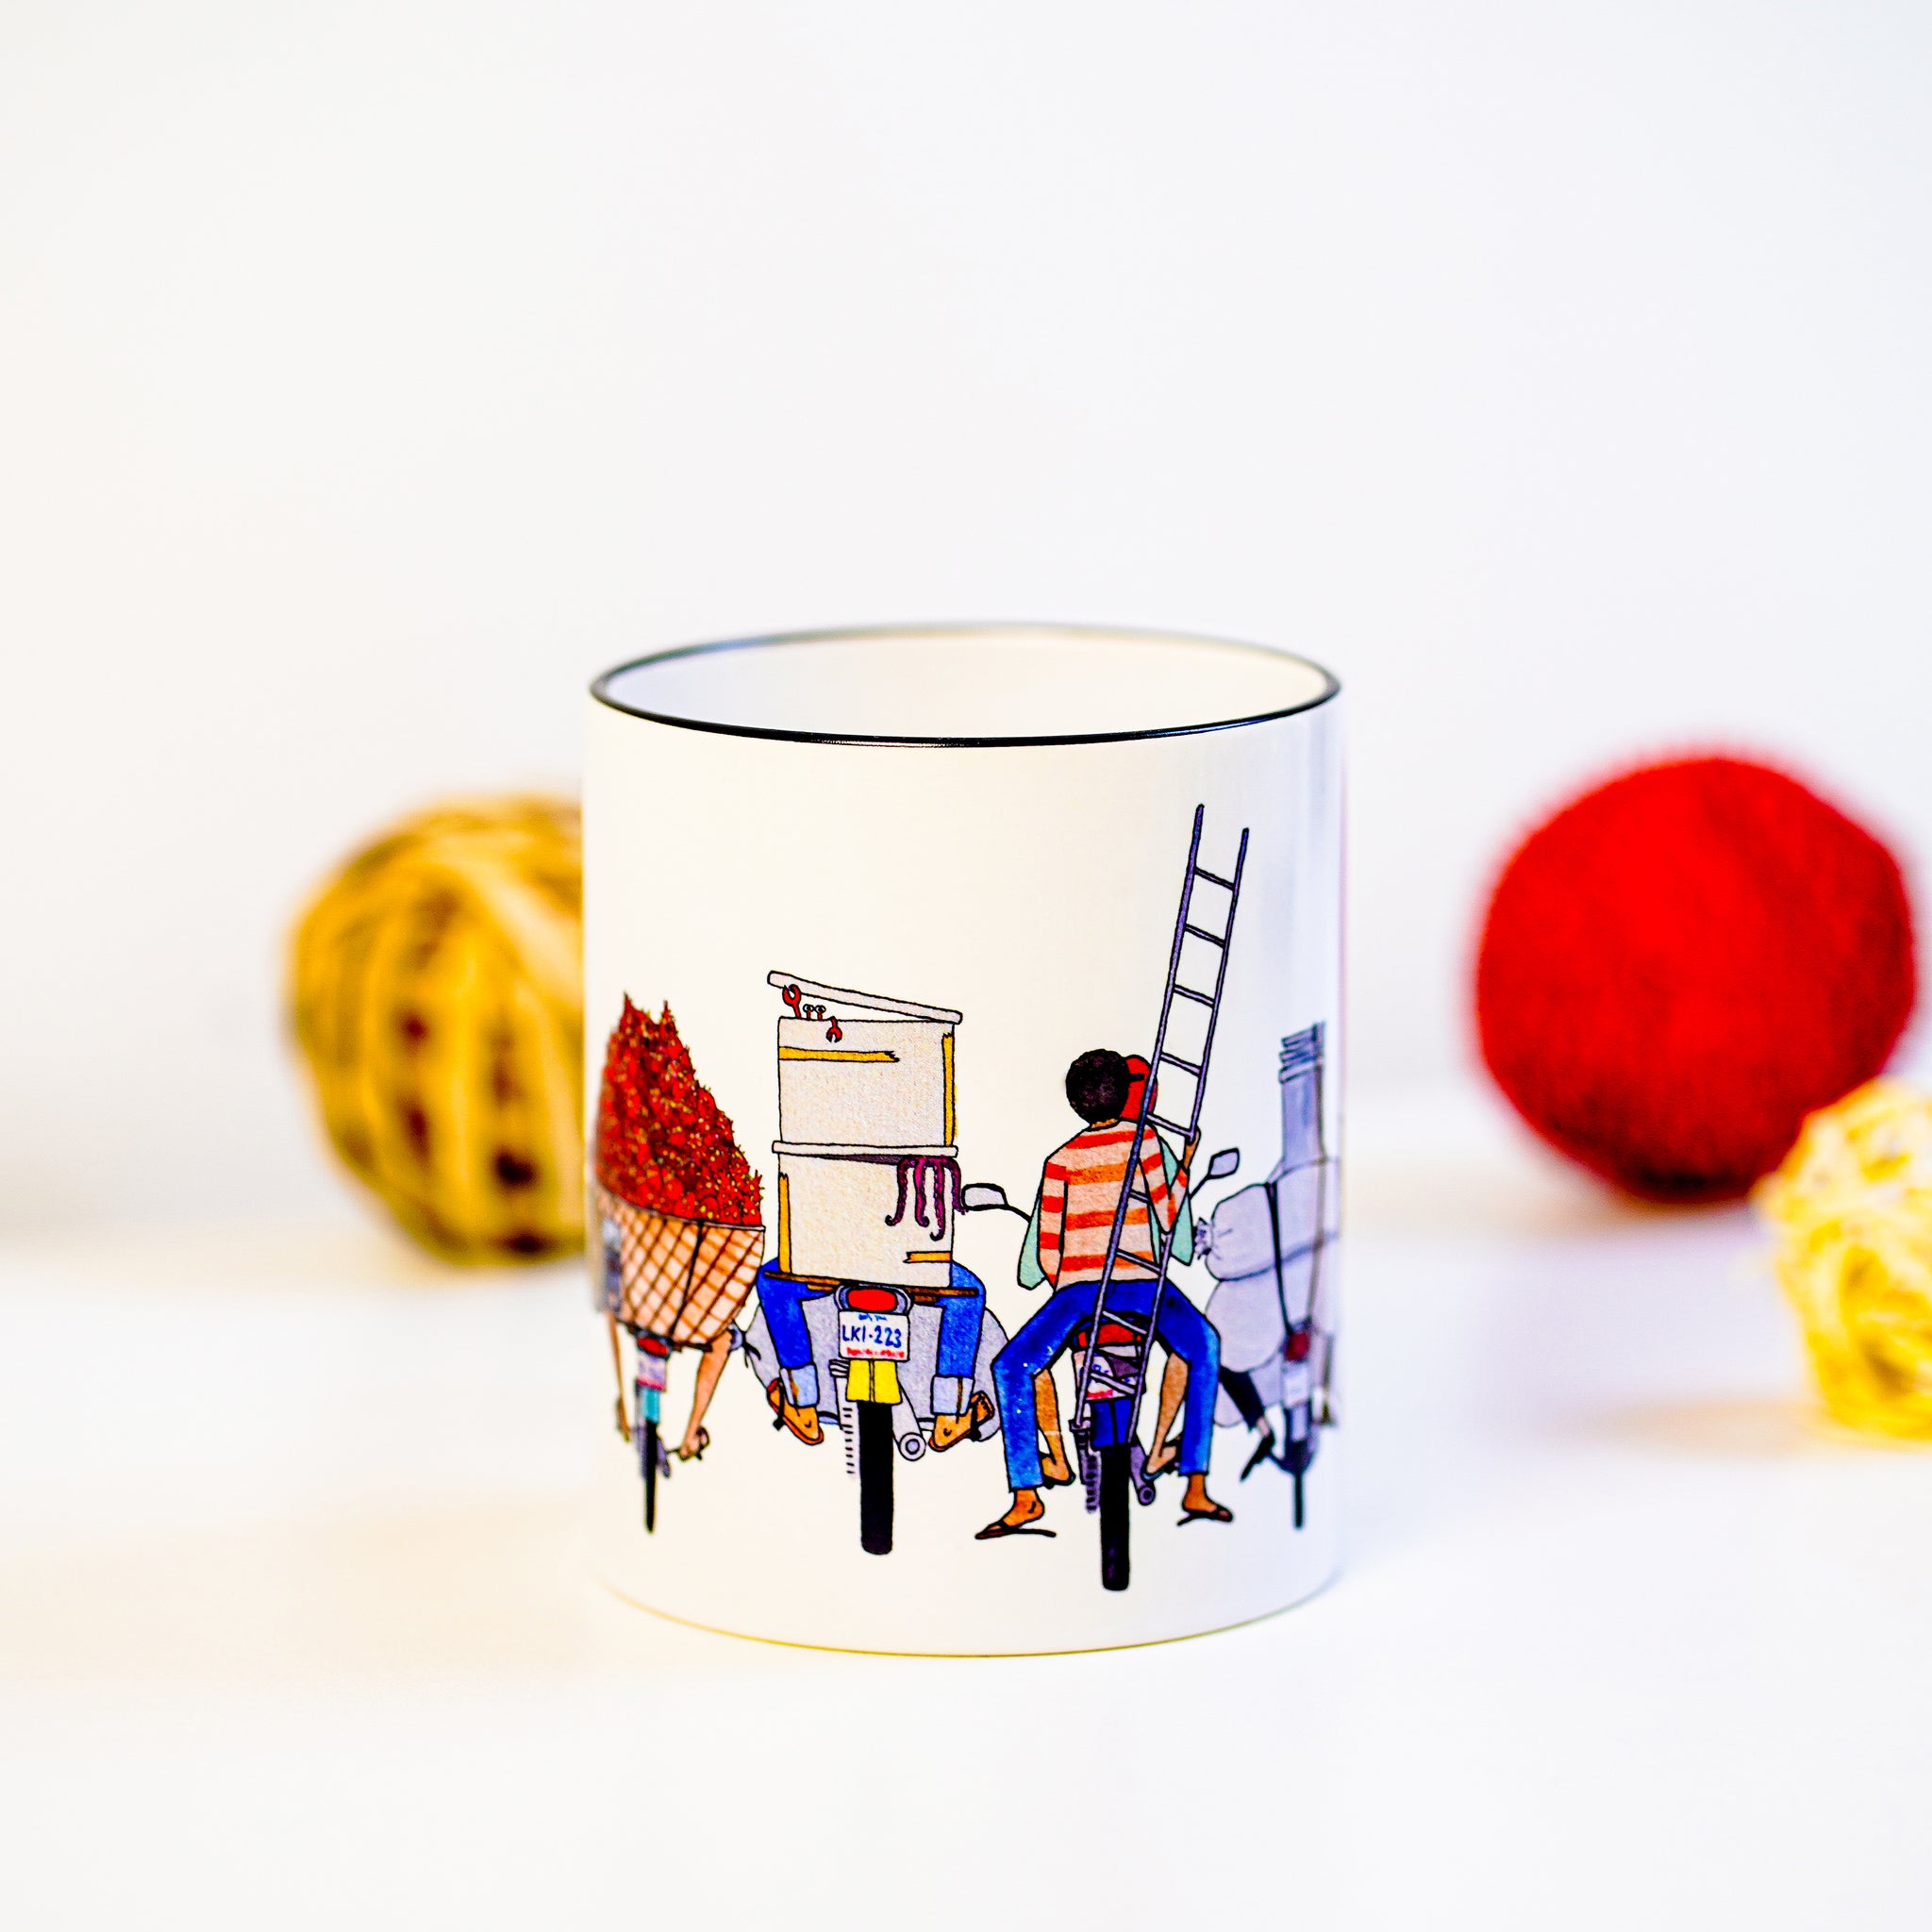 This mug features an eye-catching design that captures the sights and sounds of everyday life in Cambodia, bringing joy to any beverage experience. Its rainbow-colored tones make it an ideal present for yourself or a special someone.